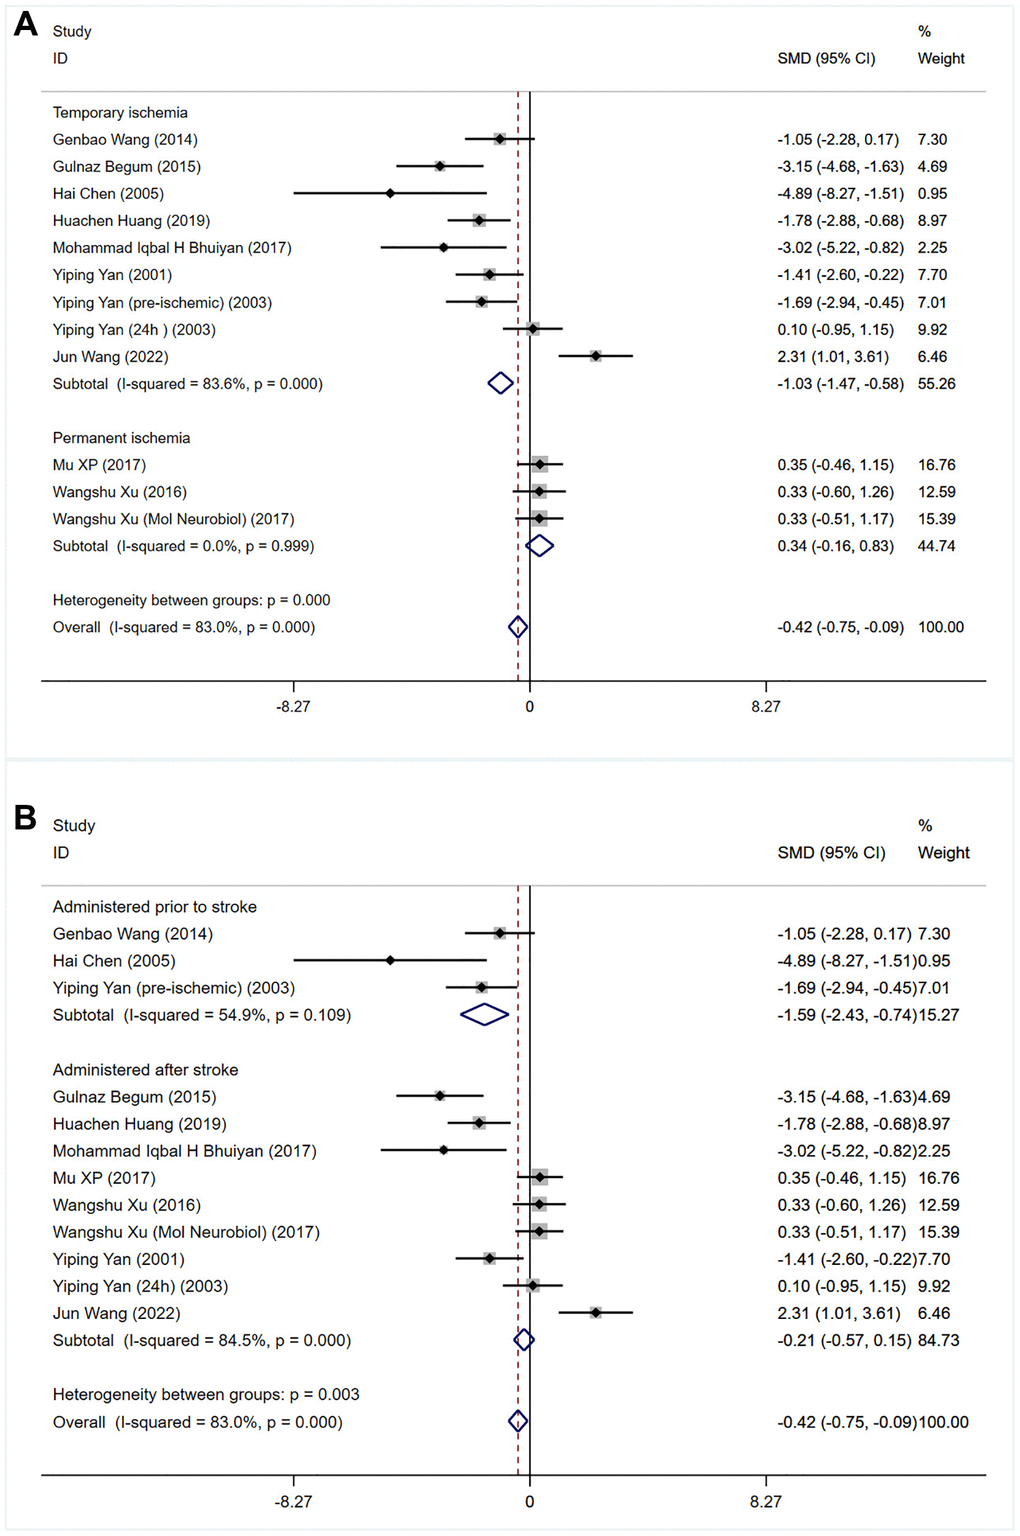 Meta-analysis of infarct volume in rodents treated with bumetanide versus controls was performed, divided by (A) duration of ischemia (permanent vs. transient) and (B) timing of treatment before or after the onset of ischemia.